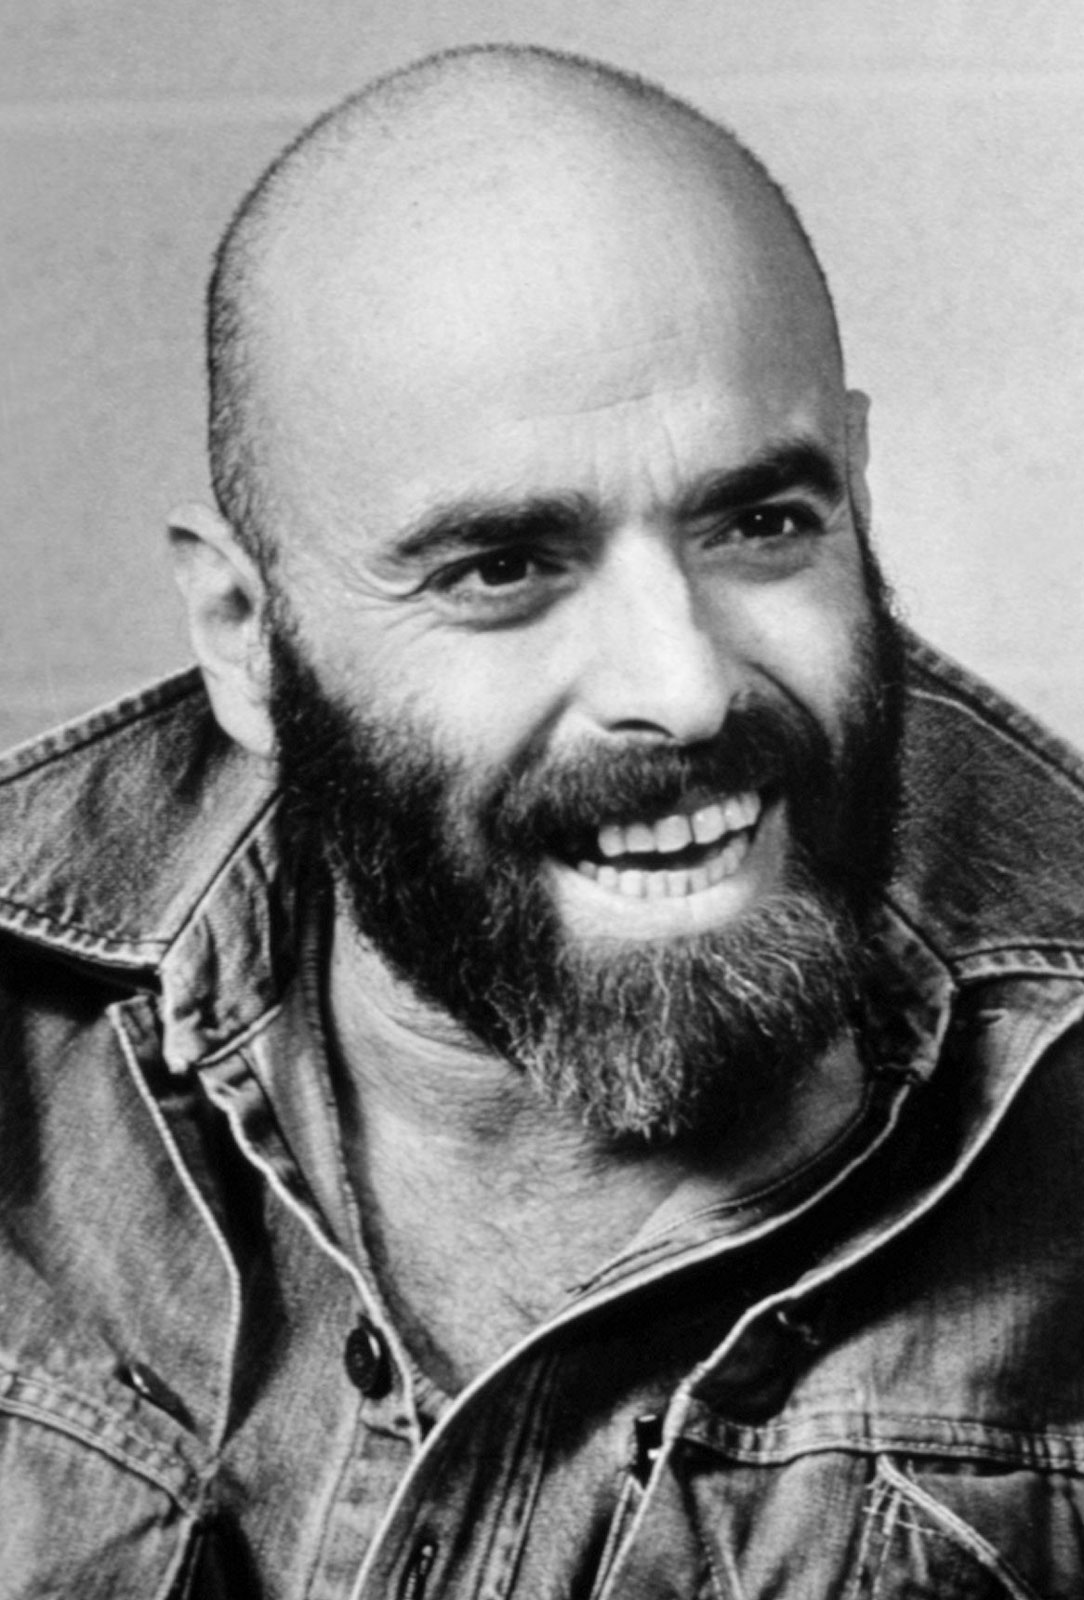 A black and white picture of Shel Silverstein. He has a bald head with thick eyebrows and a bushy beard.